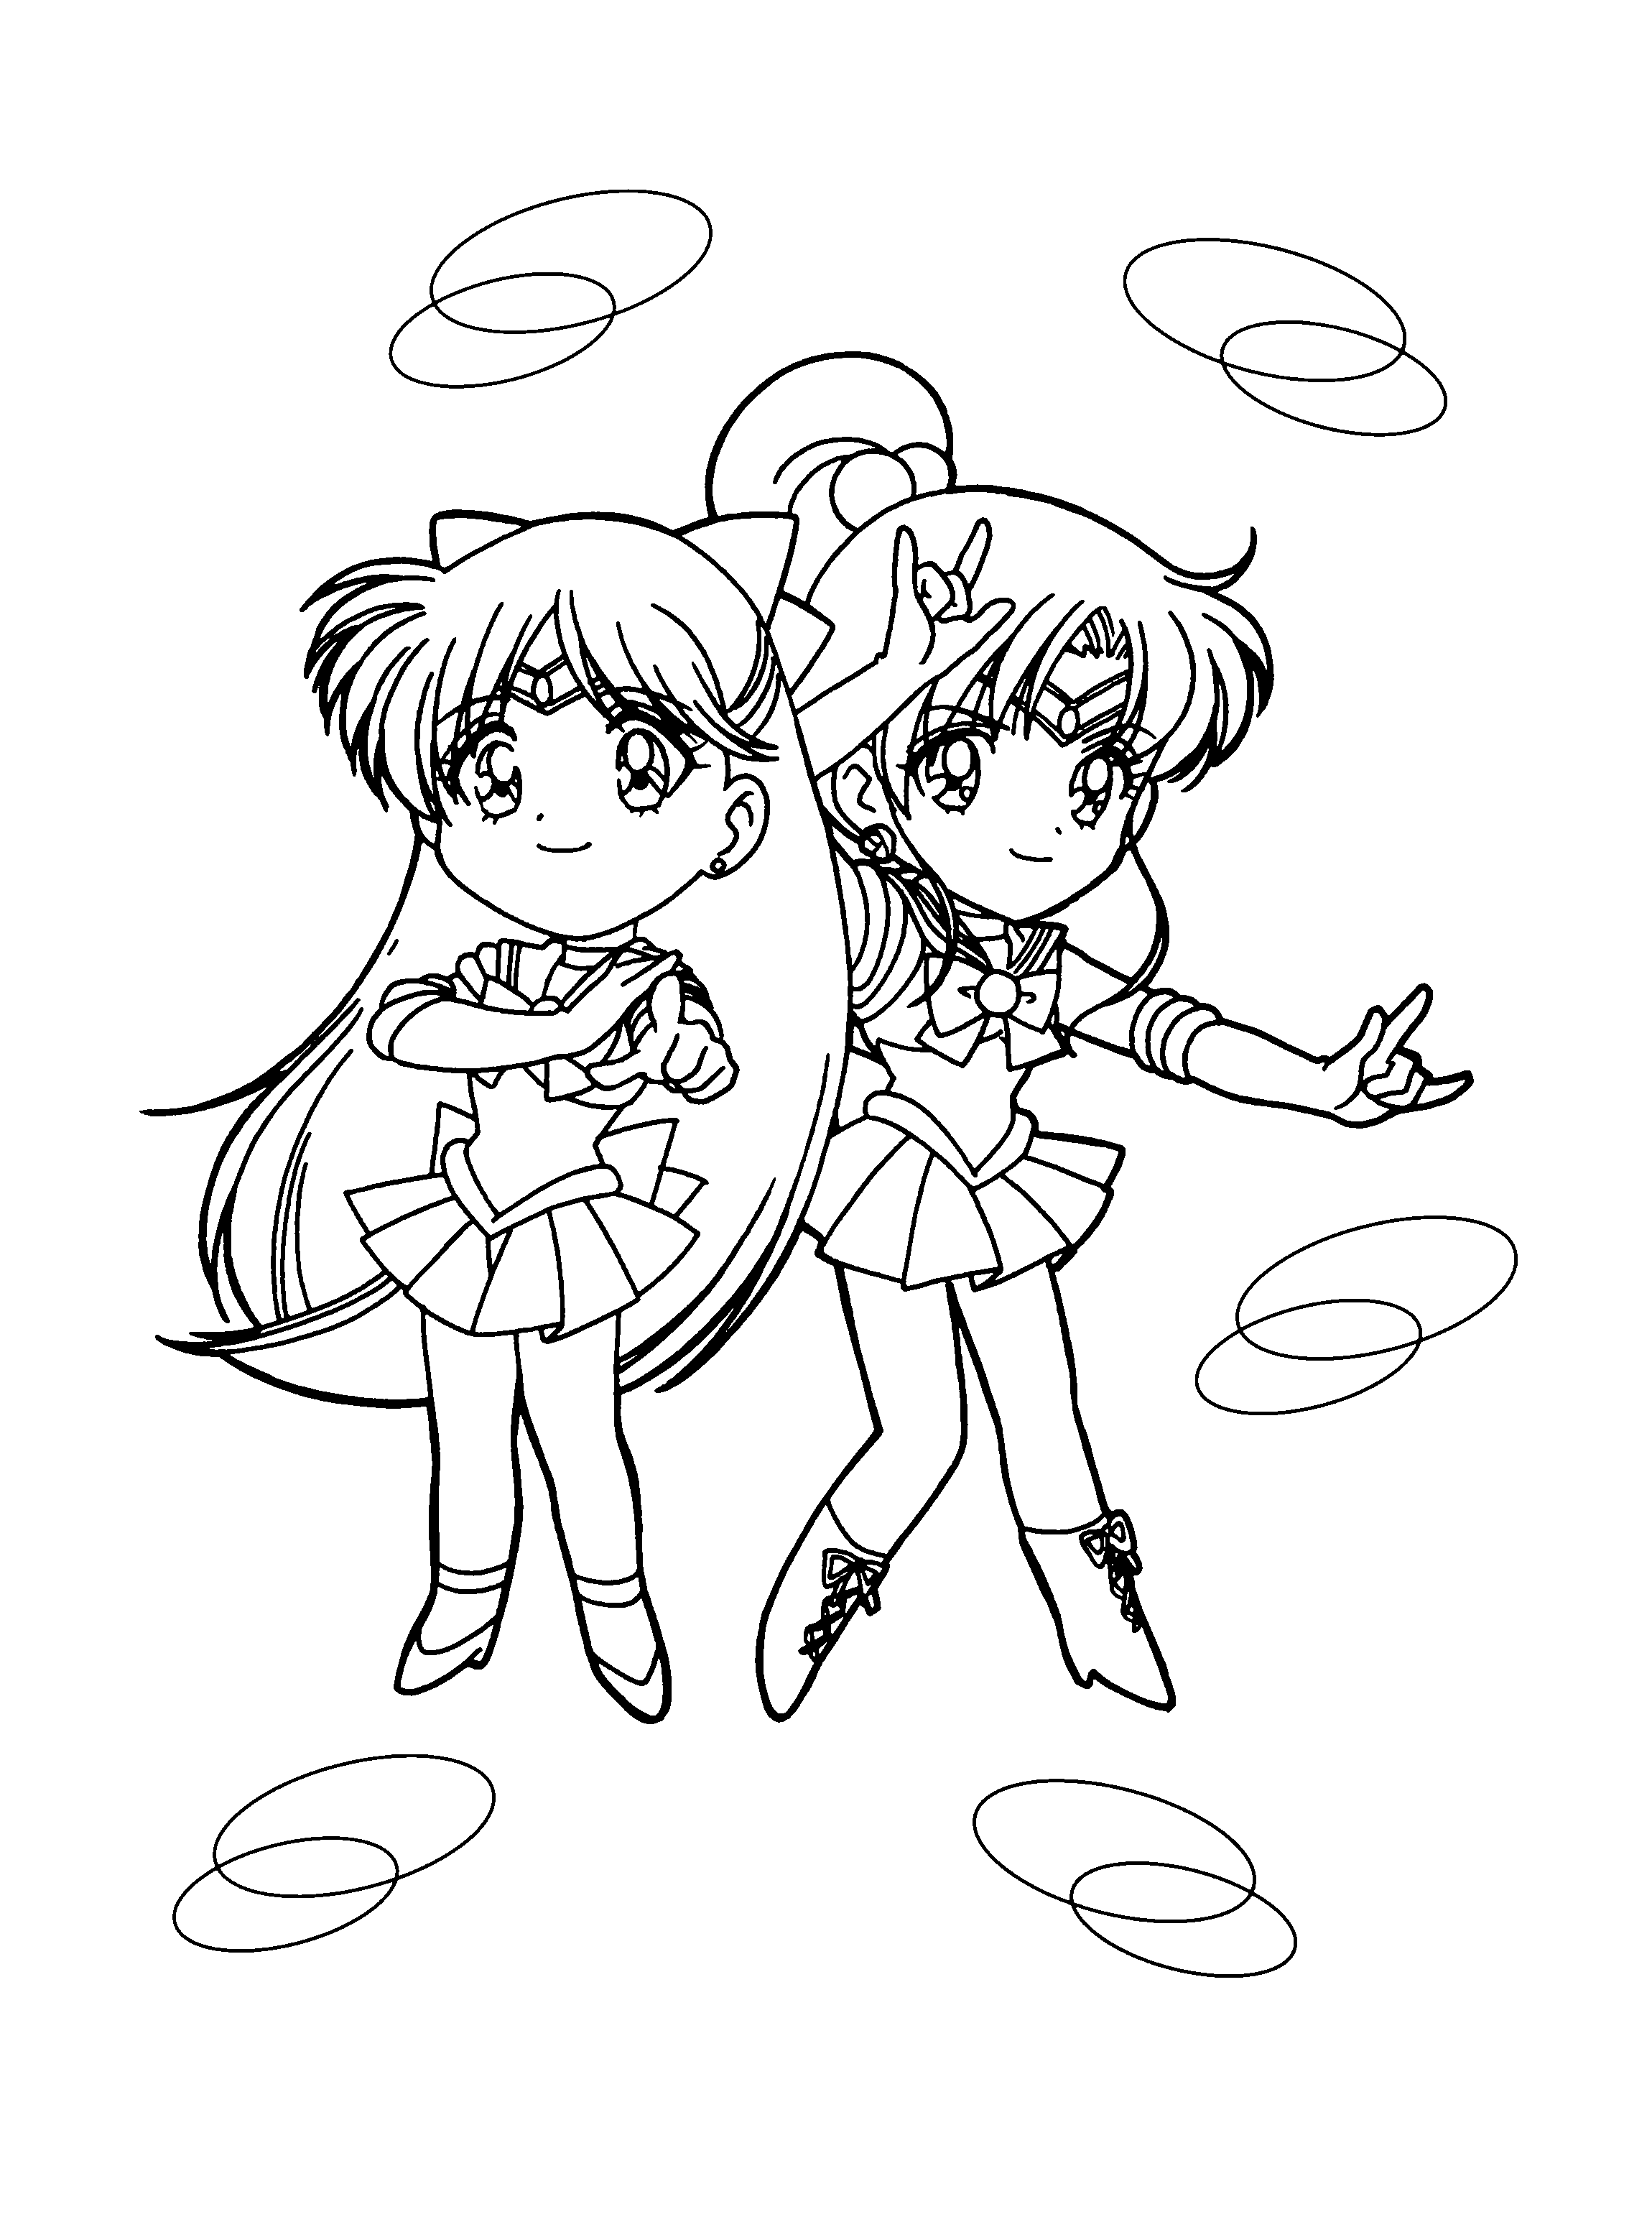 animated-coloring-pages-sailor-moon-image-0074